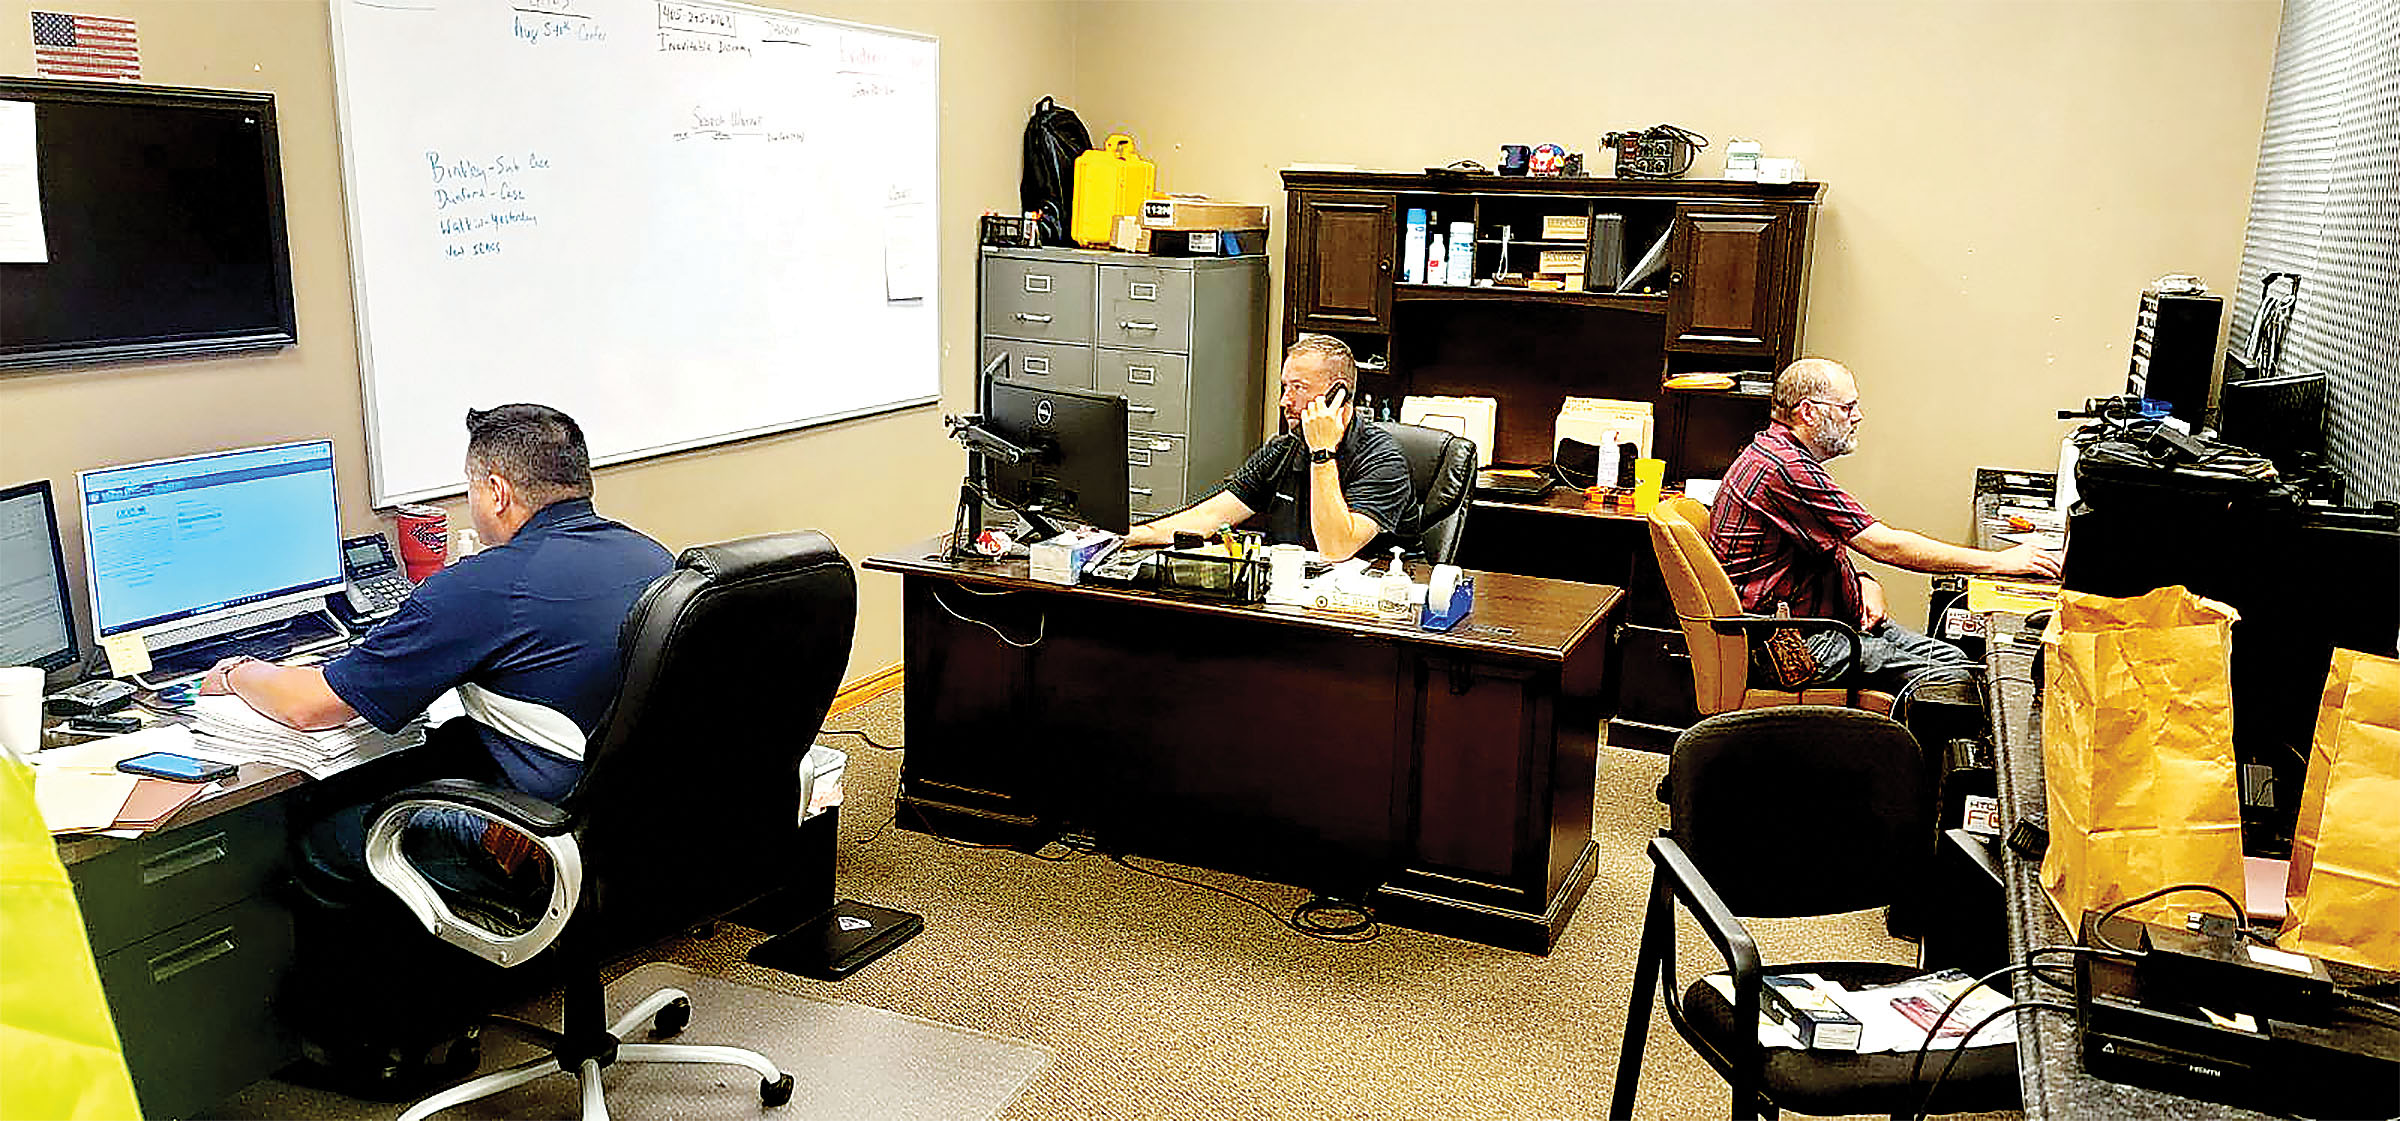 Members of the Canadian County Sheriff’s Office’s ICAC unit work cases not only inside the county borders but statewide due in part to credentials earned from the Oklahoma State Bureau of Investigation. (Tribune photographer/Glen Miller)